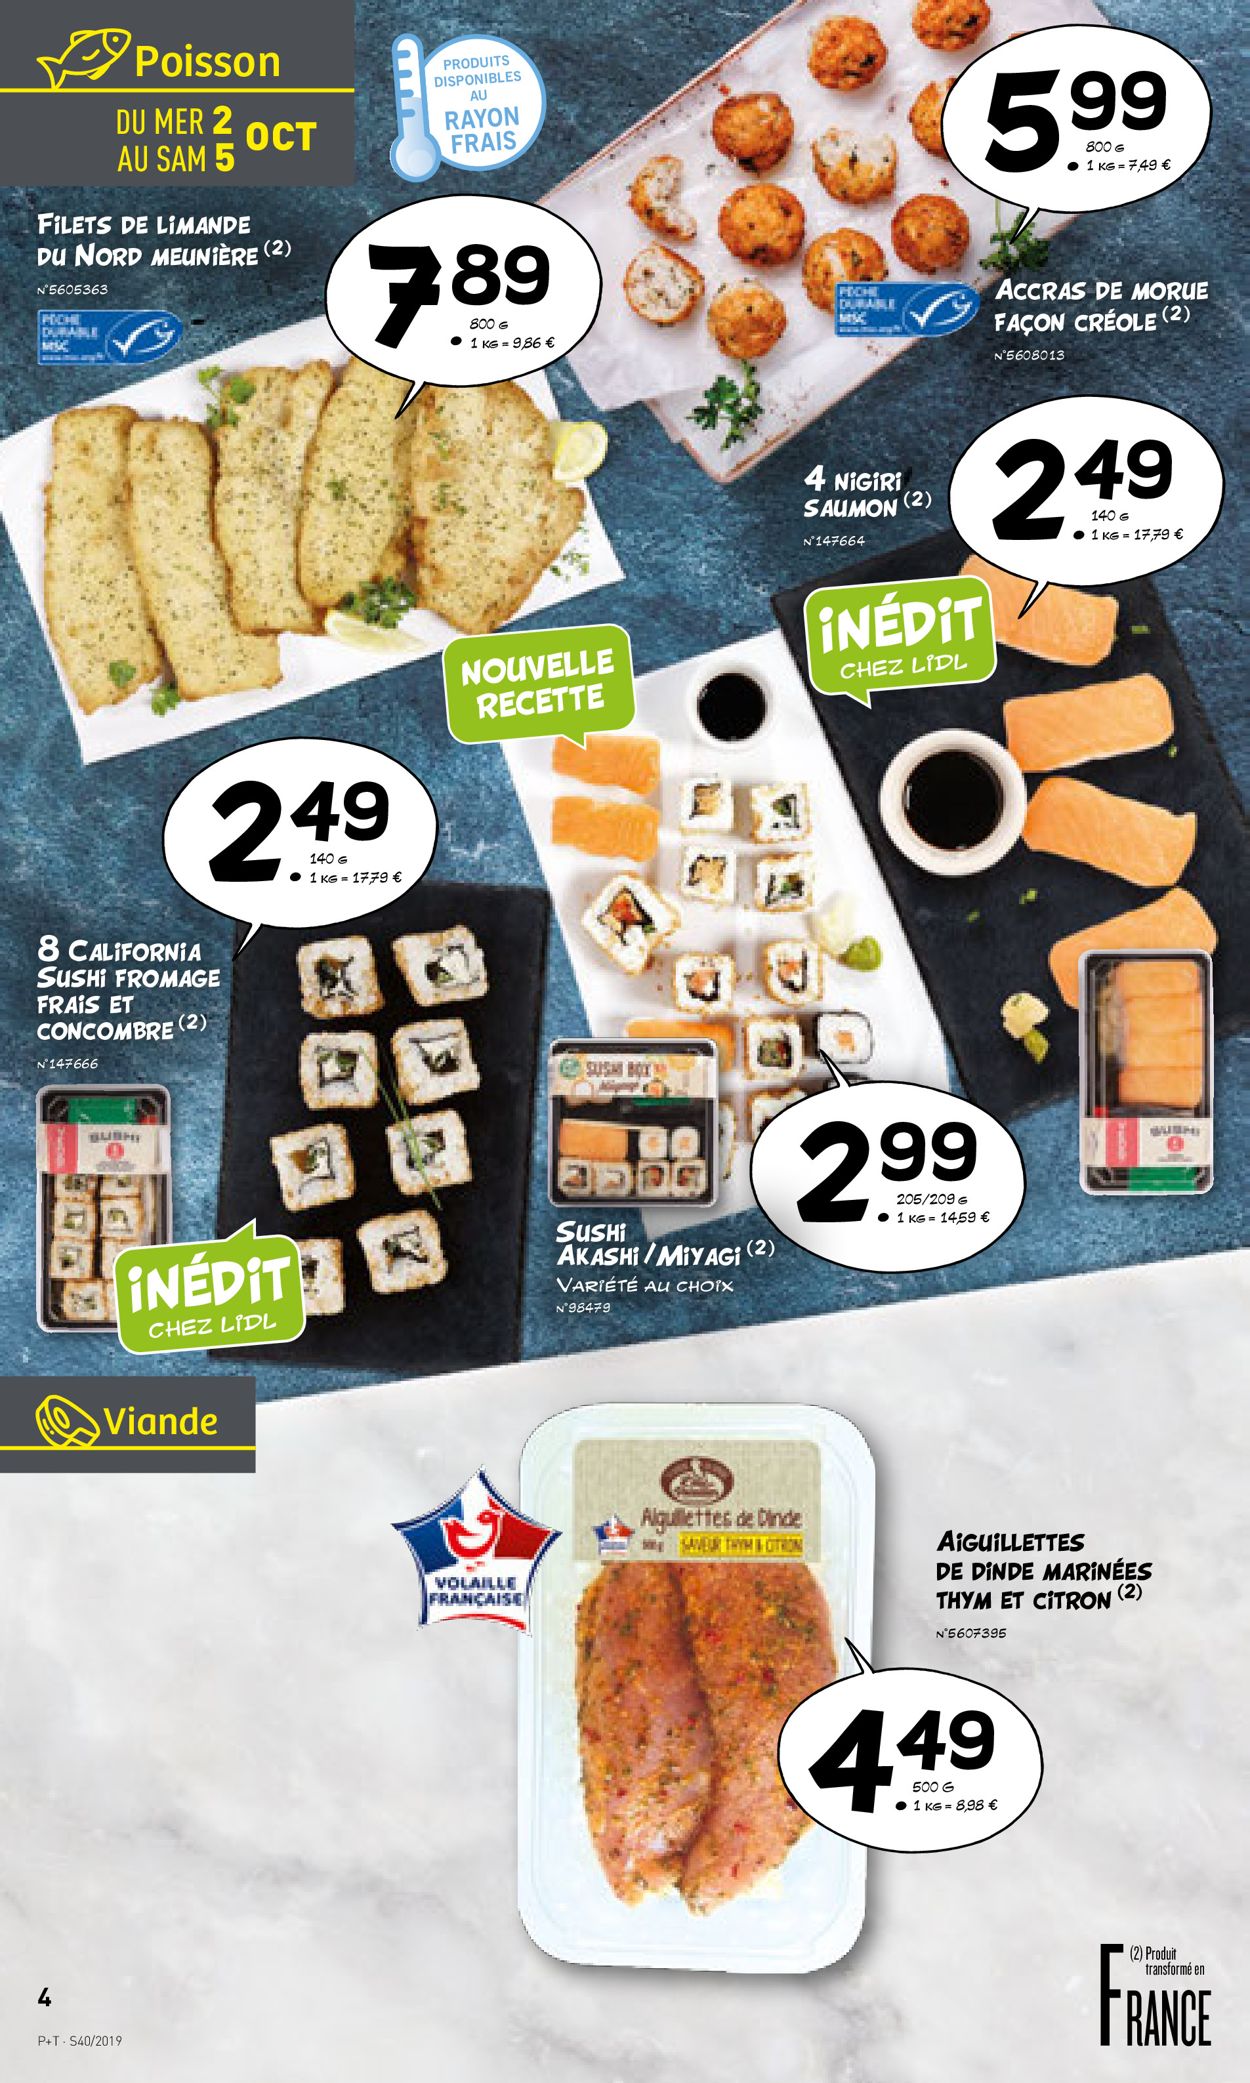 Lidl Catalogue - 02.10-08.10.2019 (Page 4)